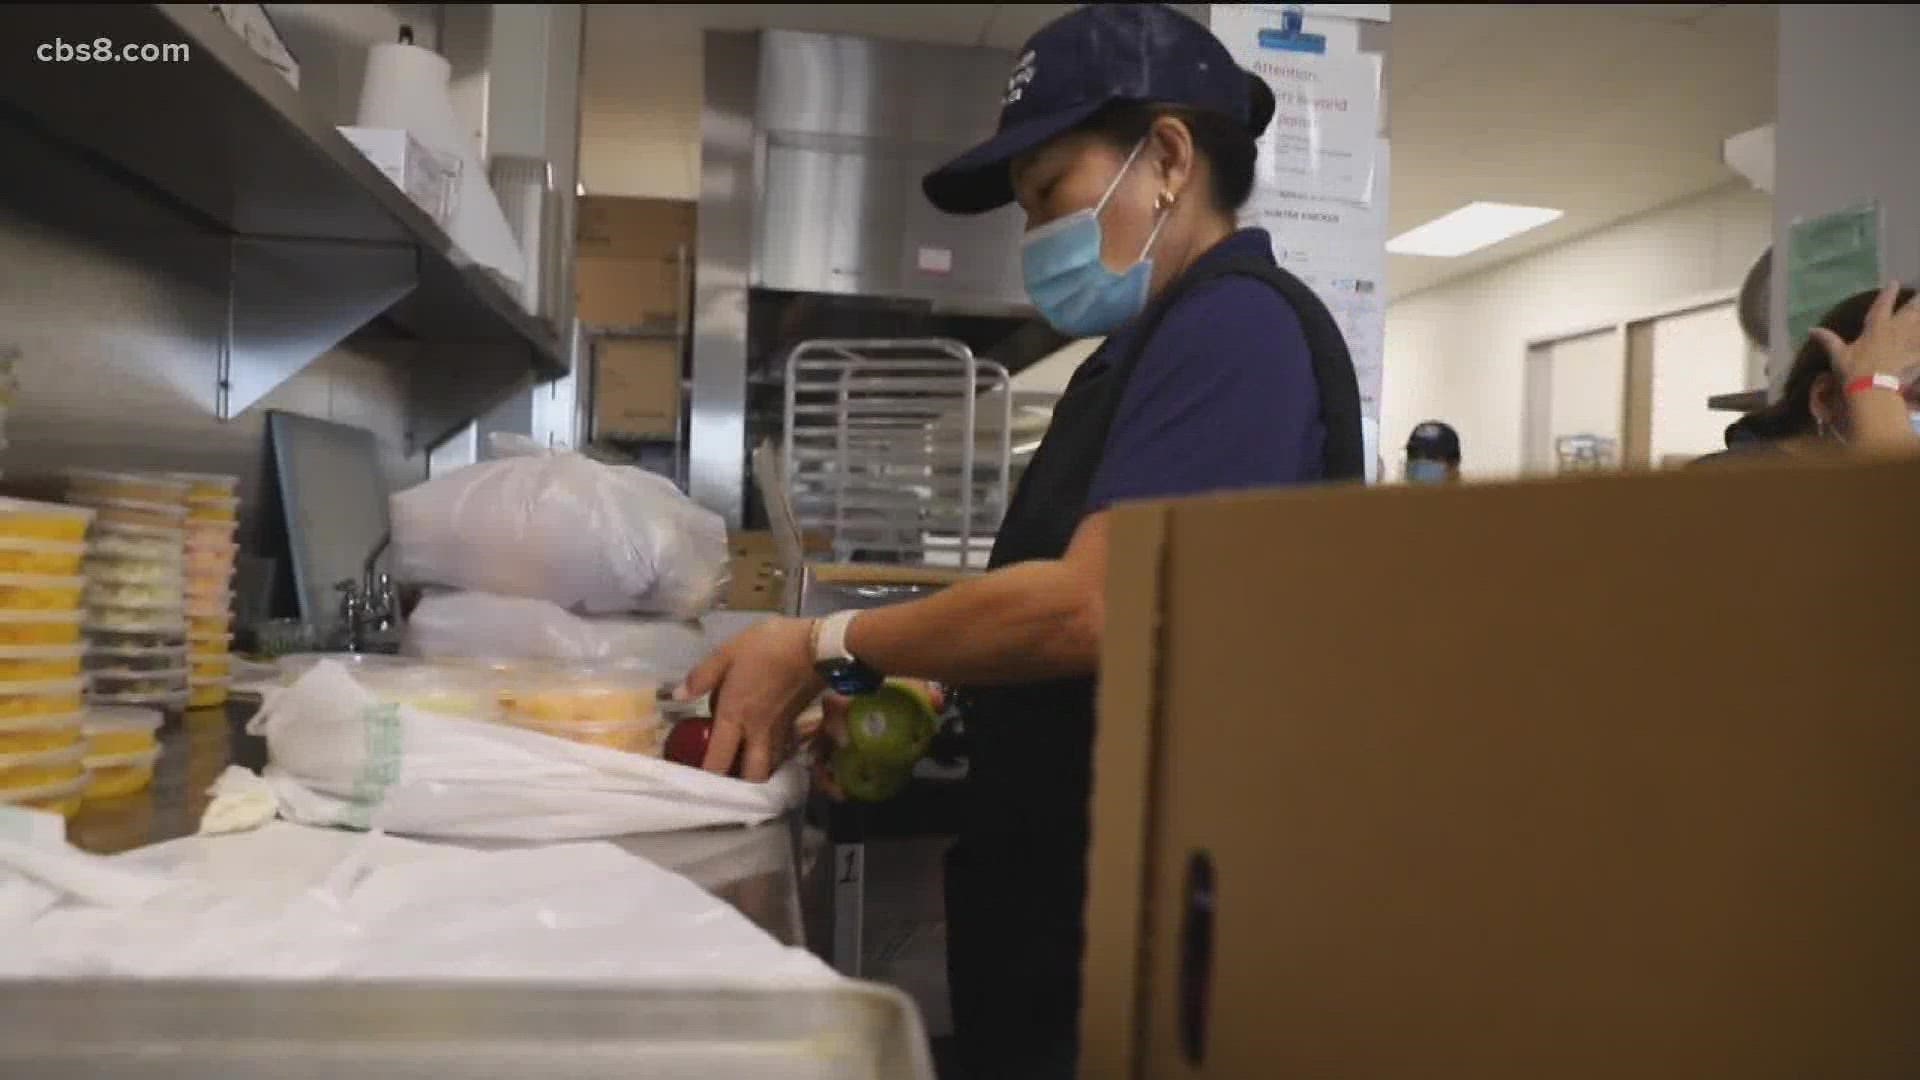 Increased cost of living and gas prices are driving up demand for food but non-profits are losing volunteers.